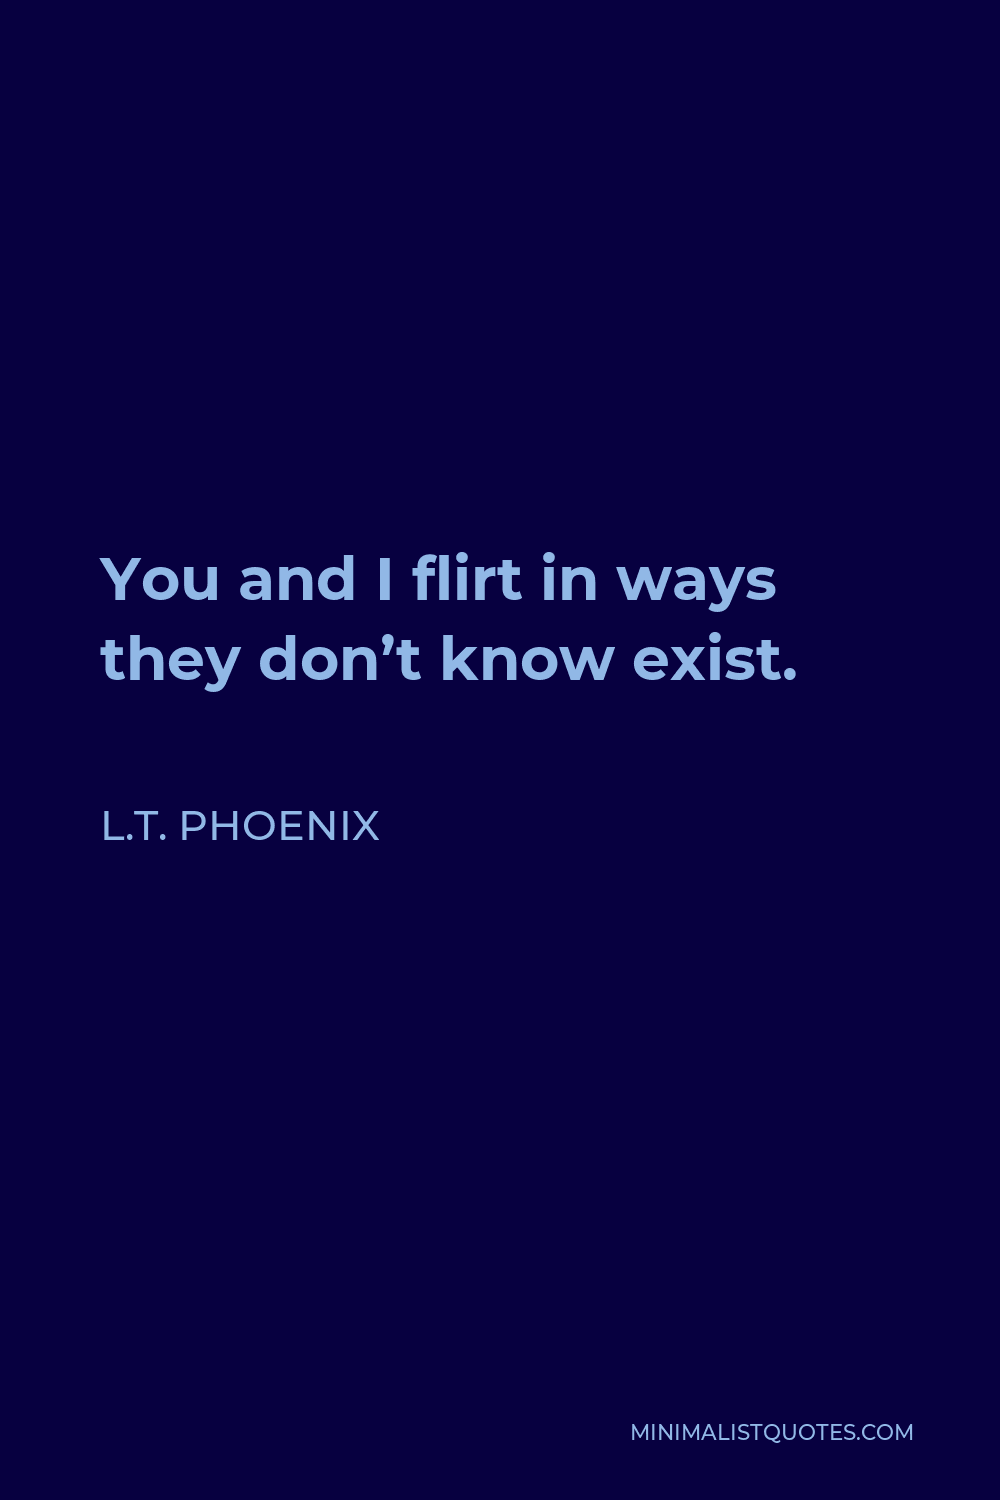 L.T. Phoenix Quote - You and I flirt in ways they don’t know exist.